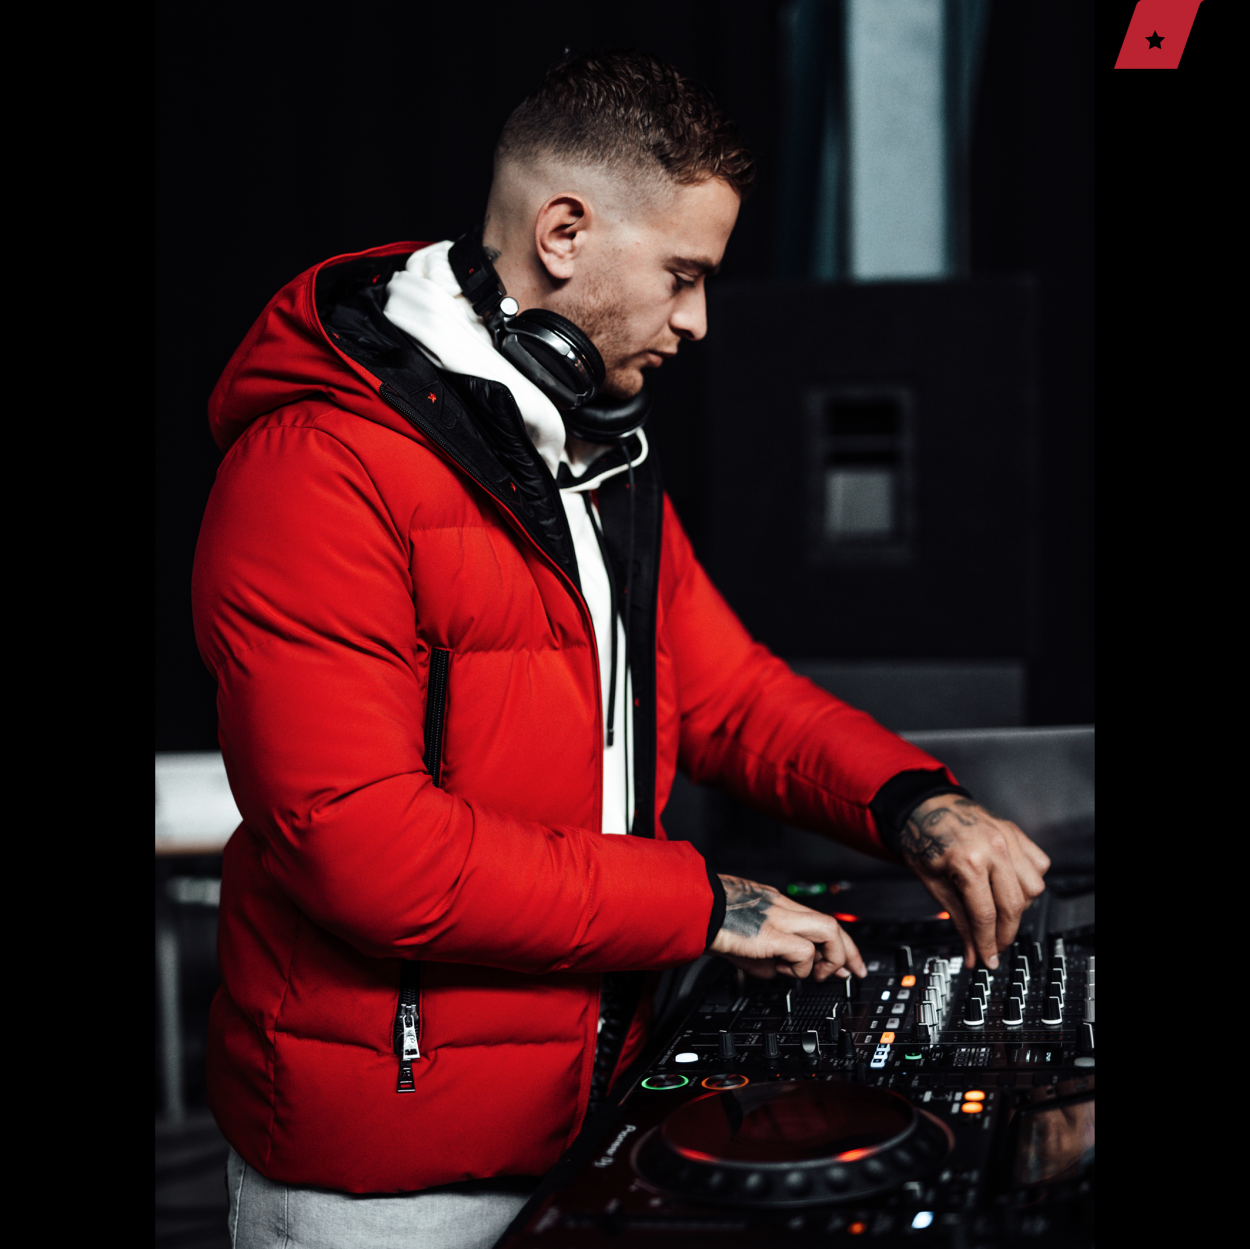 Hooded Down Jacket | Red